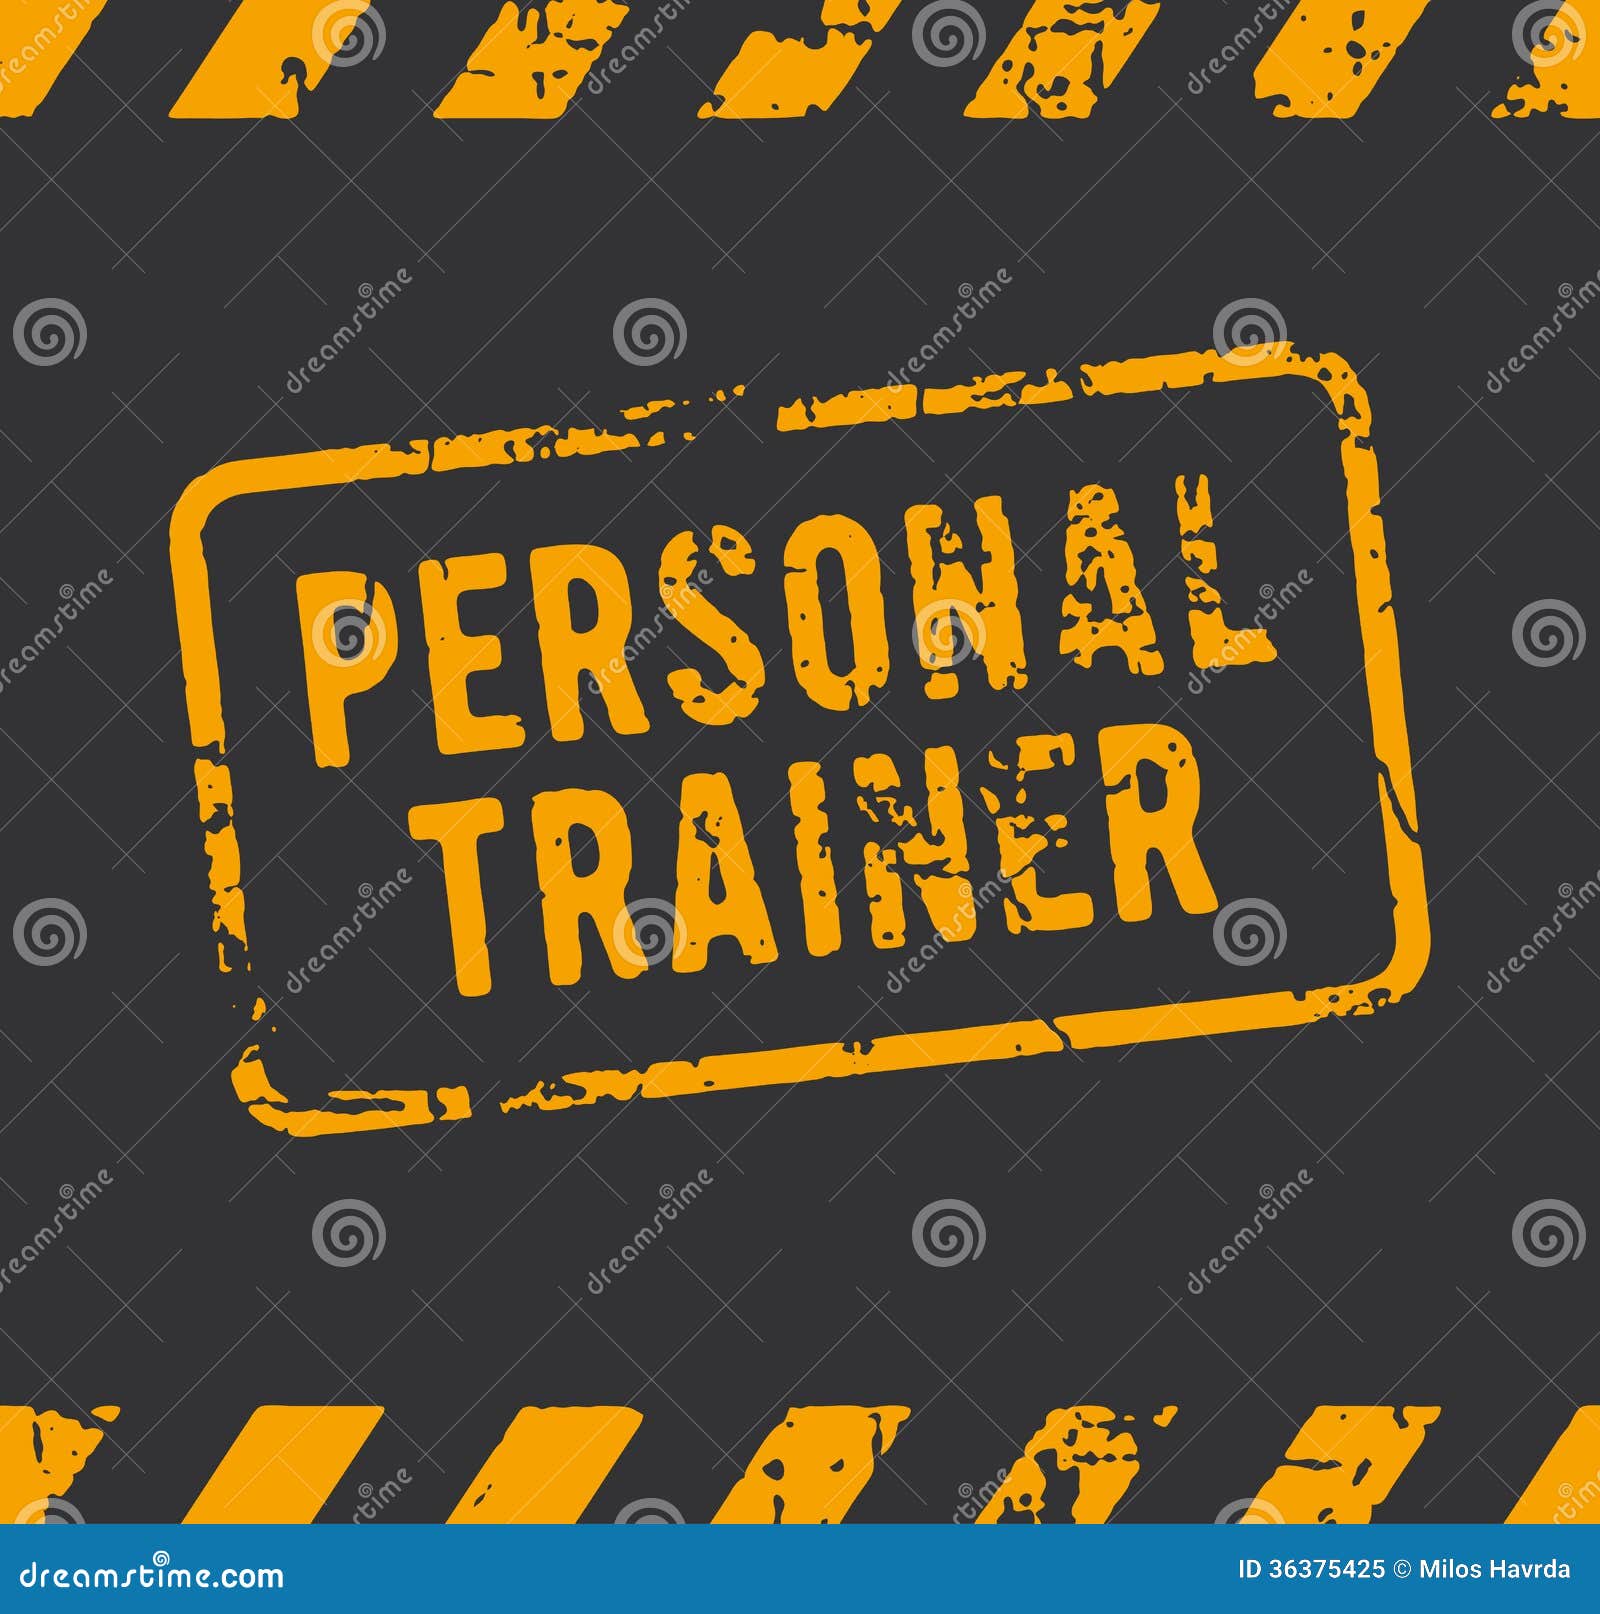 fitness trainer clipart - photo #34